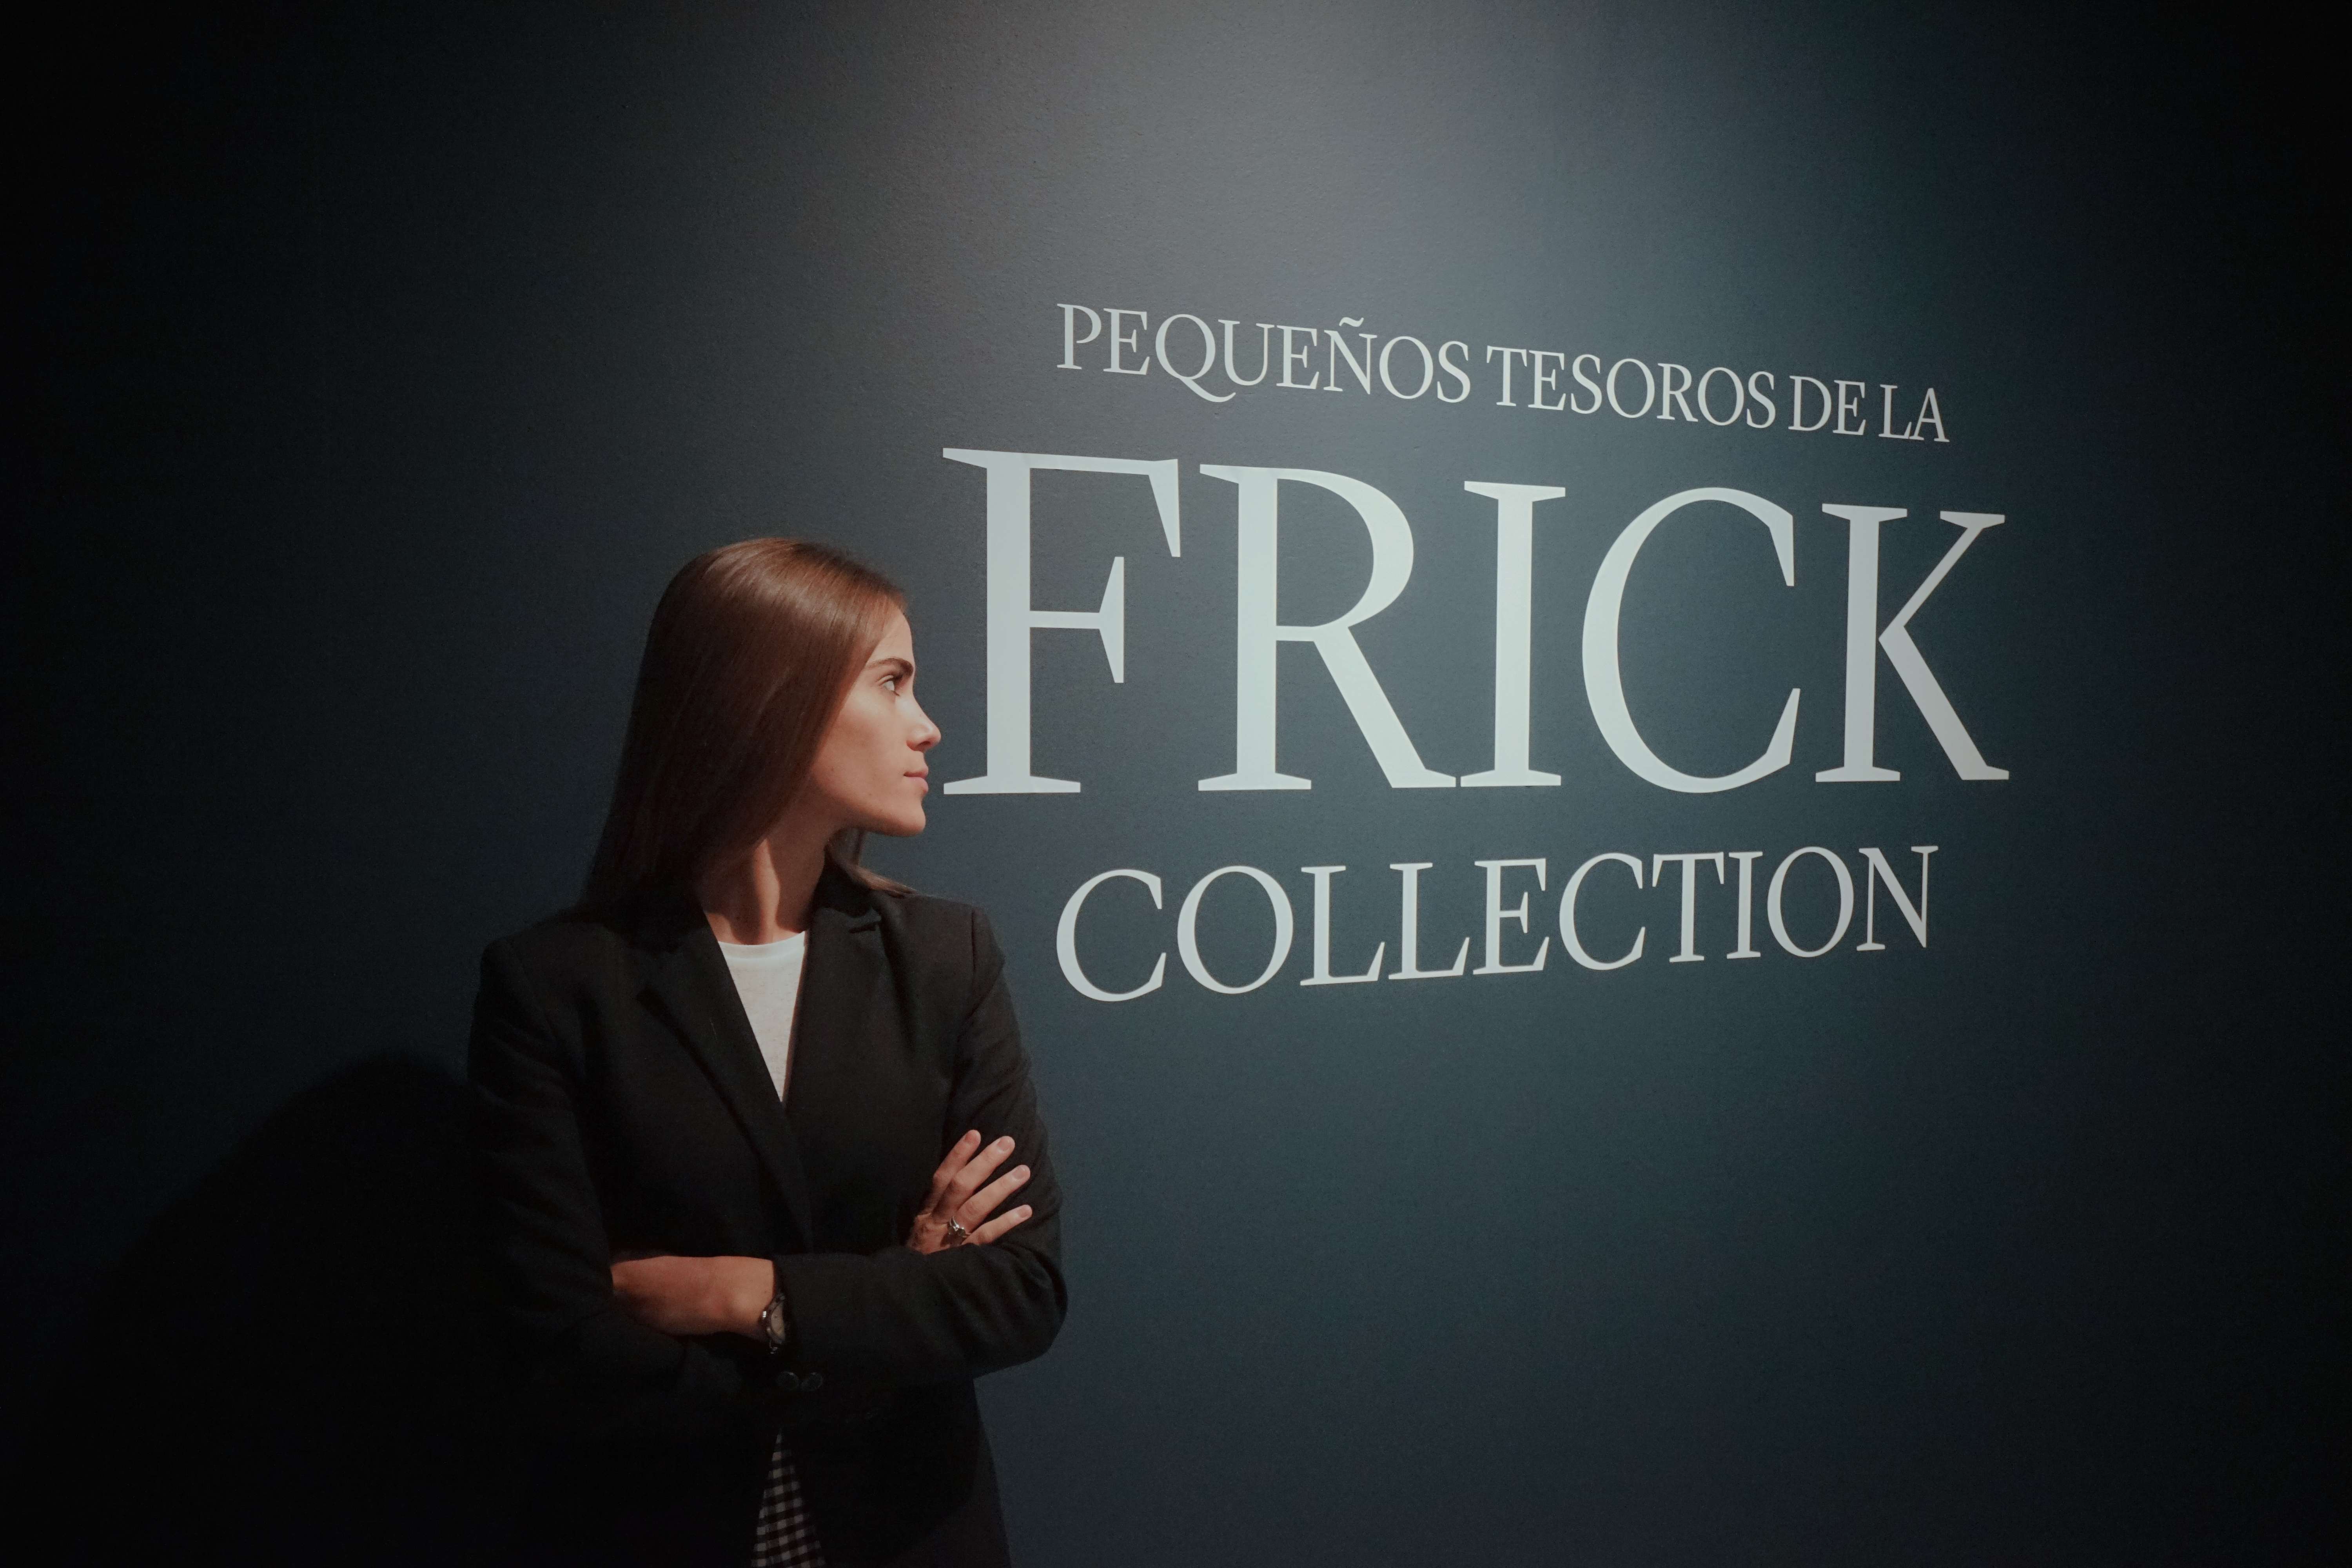 HELENA GOMEZ FRICK COLLECTION